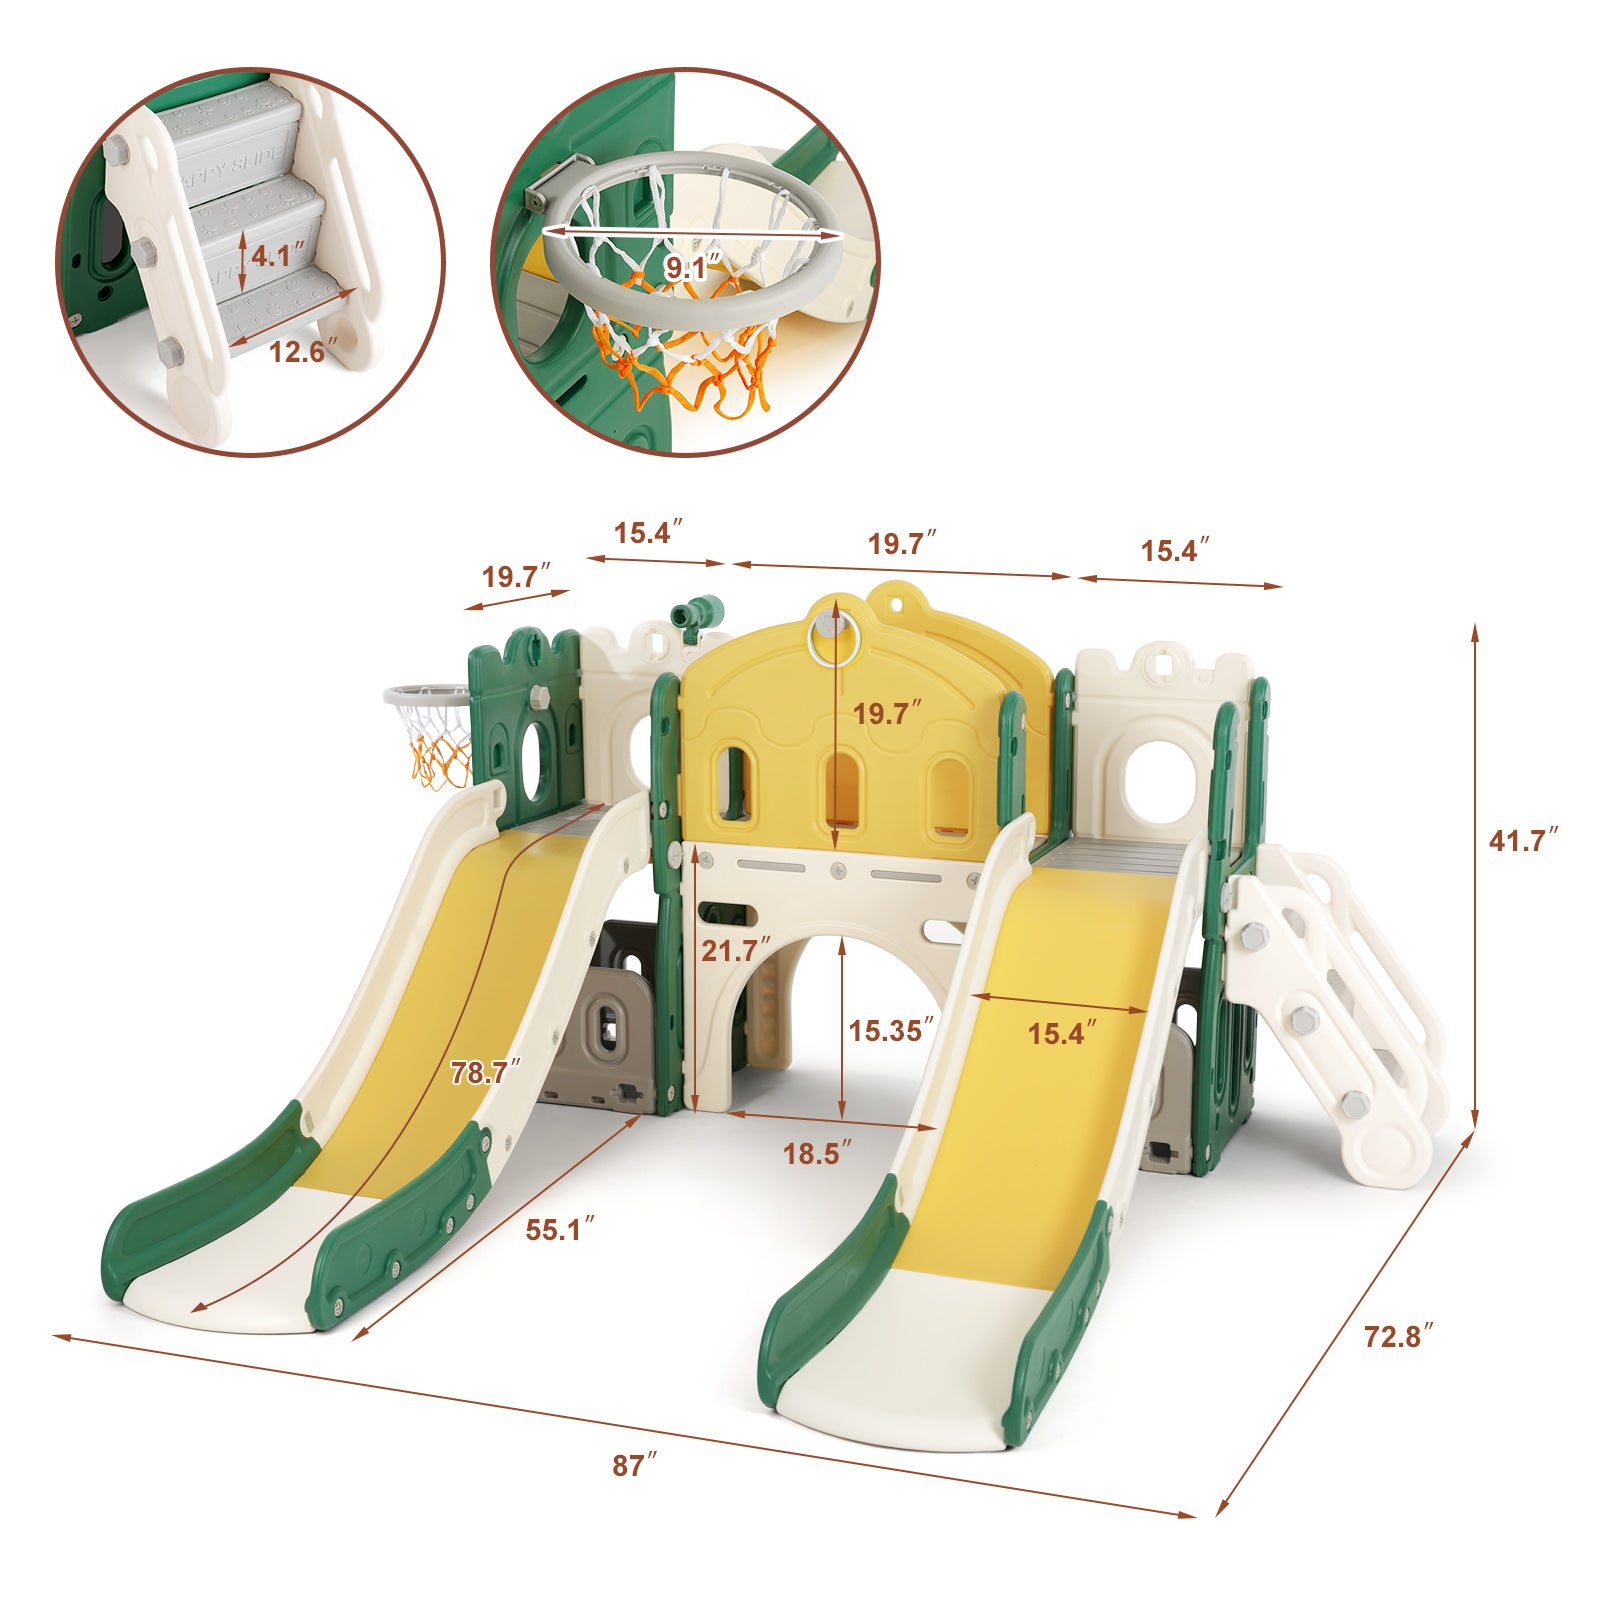 #1165  9 in 1 Toddler Slide, Toddler Playground with Double Slides, Climber,Basketball Hoop,Tunnel, Telescope, Storage Space and Non-Slip Step, Indoor Outdoor Backyard Playset for Toddlers Age 1-3+